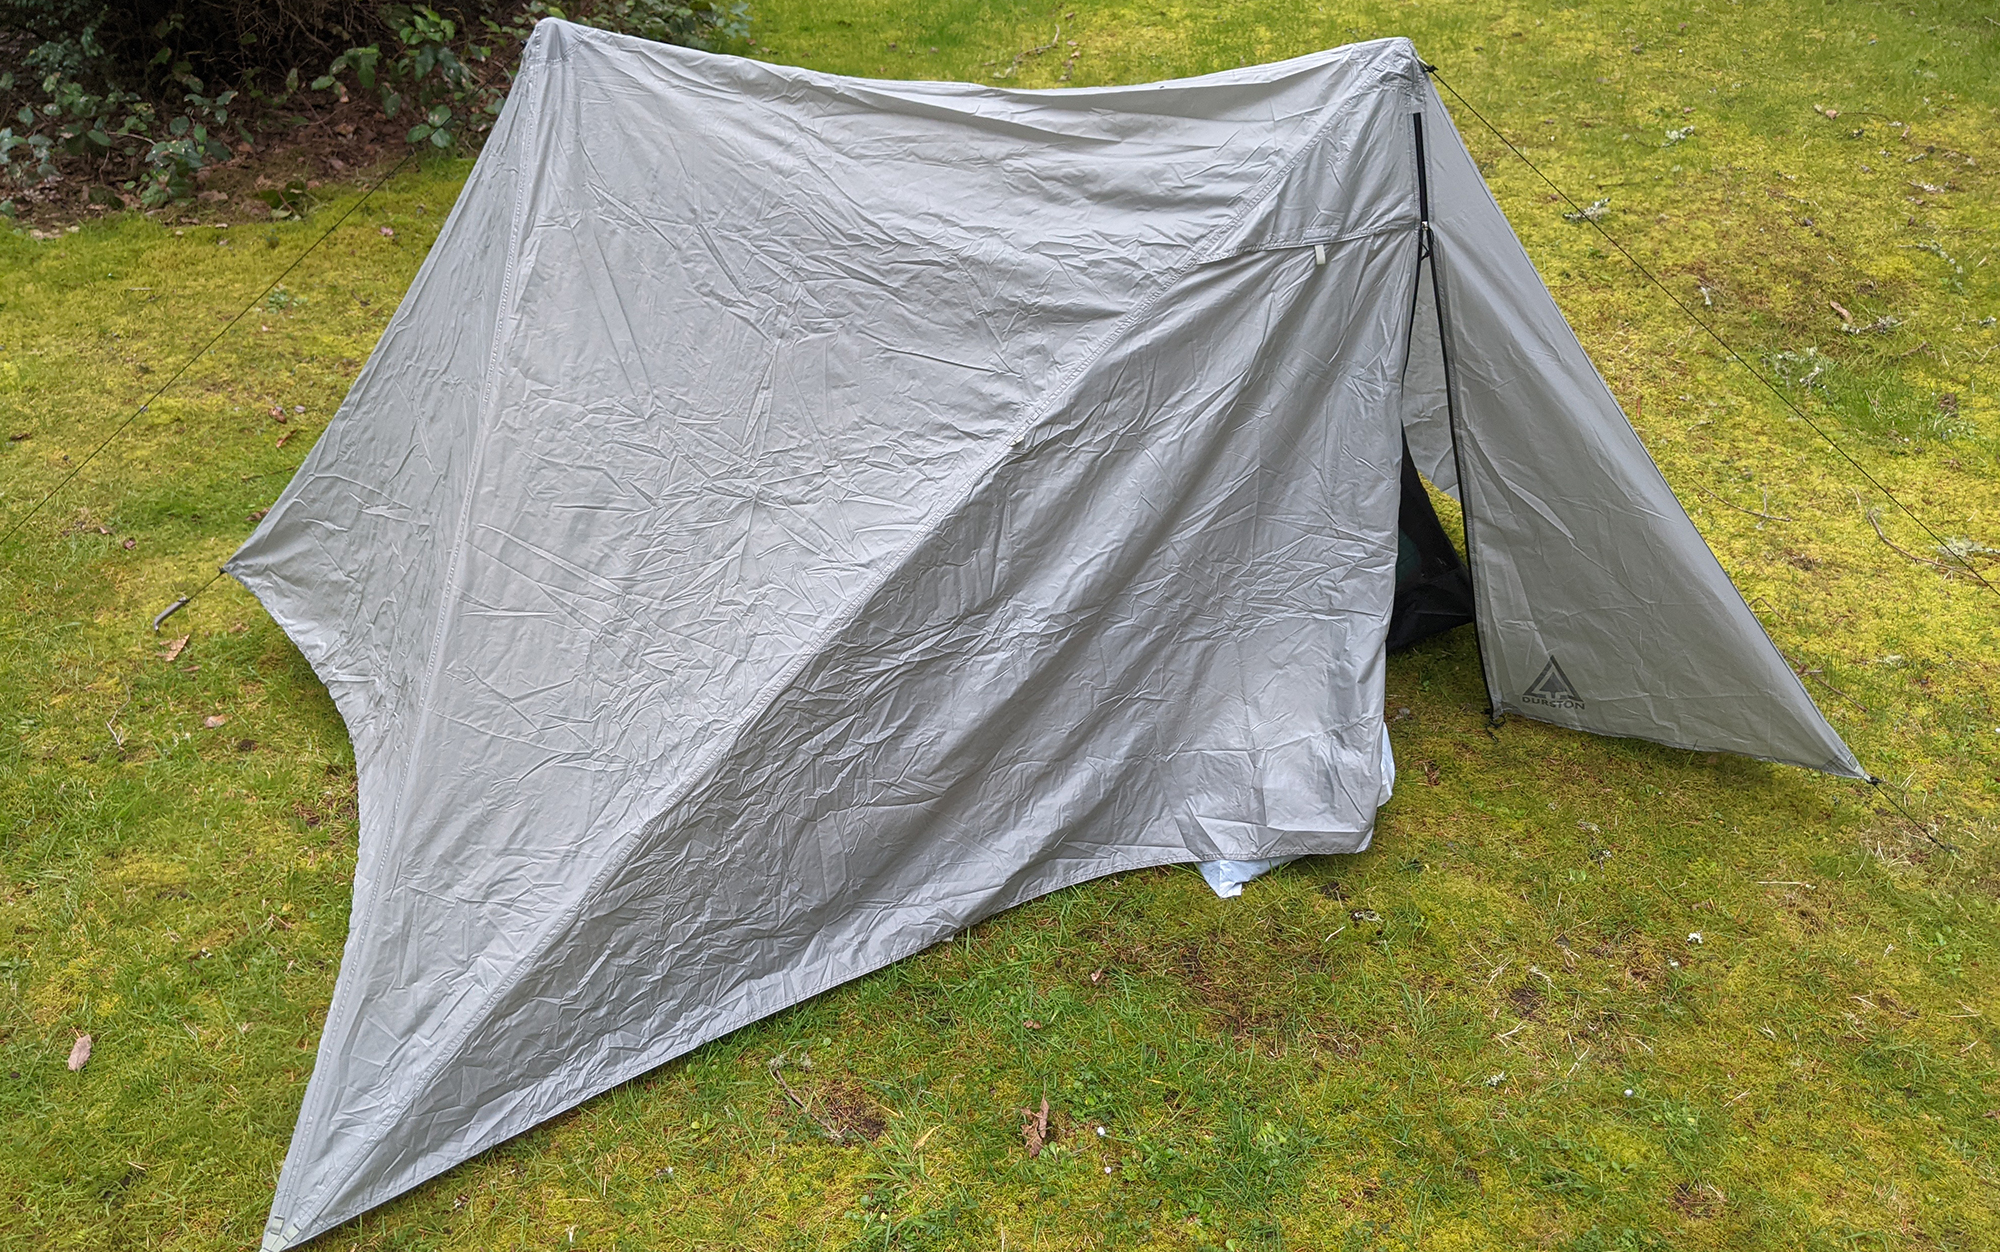 While our new-to-trekking-pole-tents tester followed the provided instructions for the initial setup, her end result wasnât as robust as we would have liked. However, it was still functional for typical backpacking conditions.